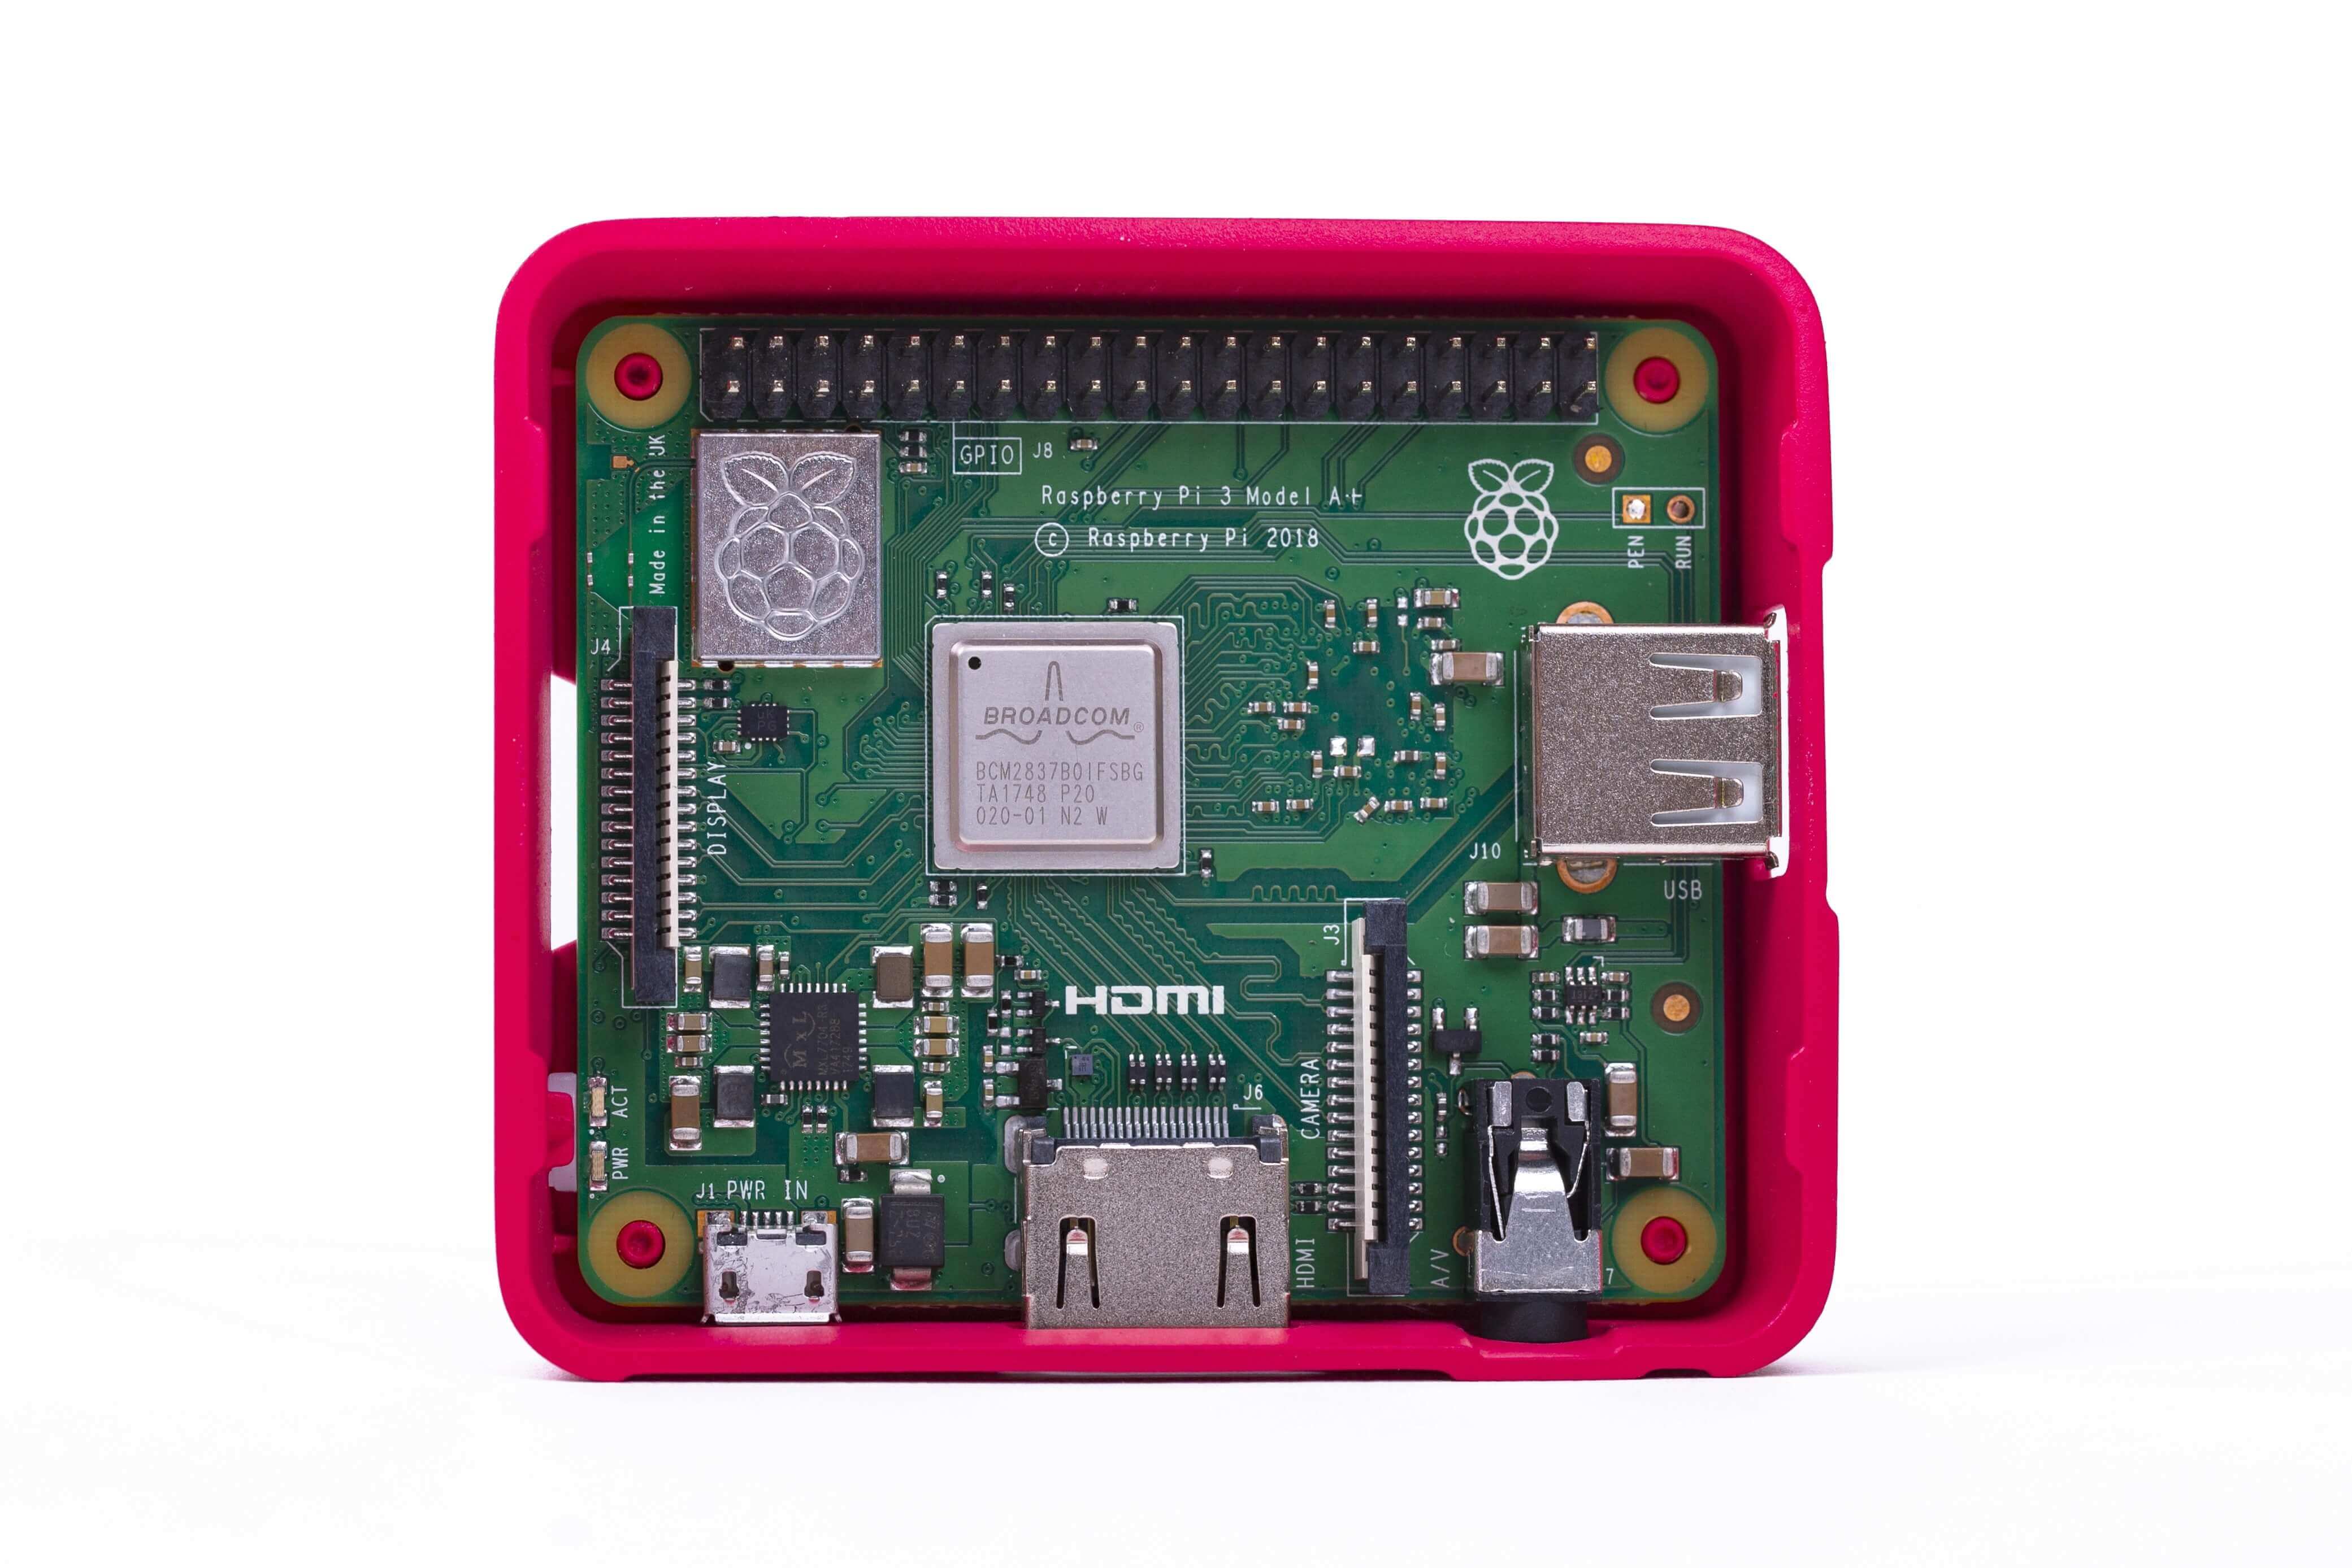 Makers rejoice: Raspberry Pi 3 Model A+ is out